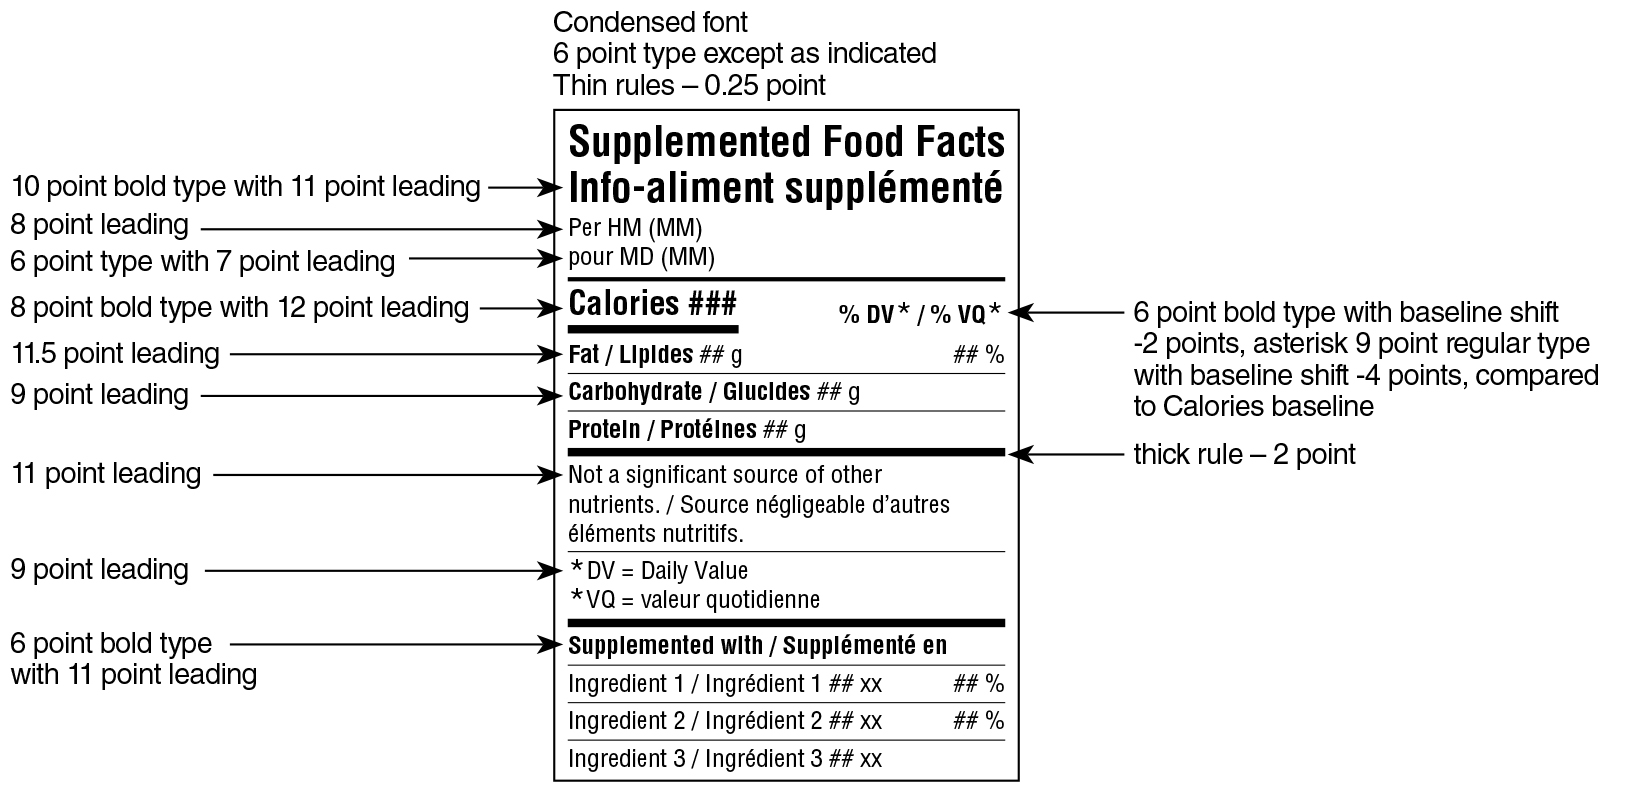 A bilingual Supplemented Food Facts table in simplified standard format surrounded by specifications. Text version below.